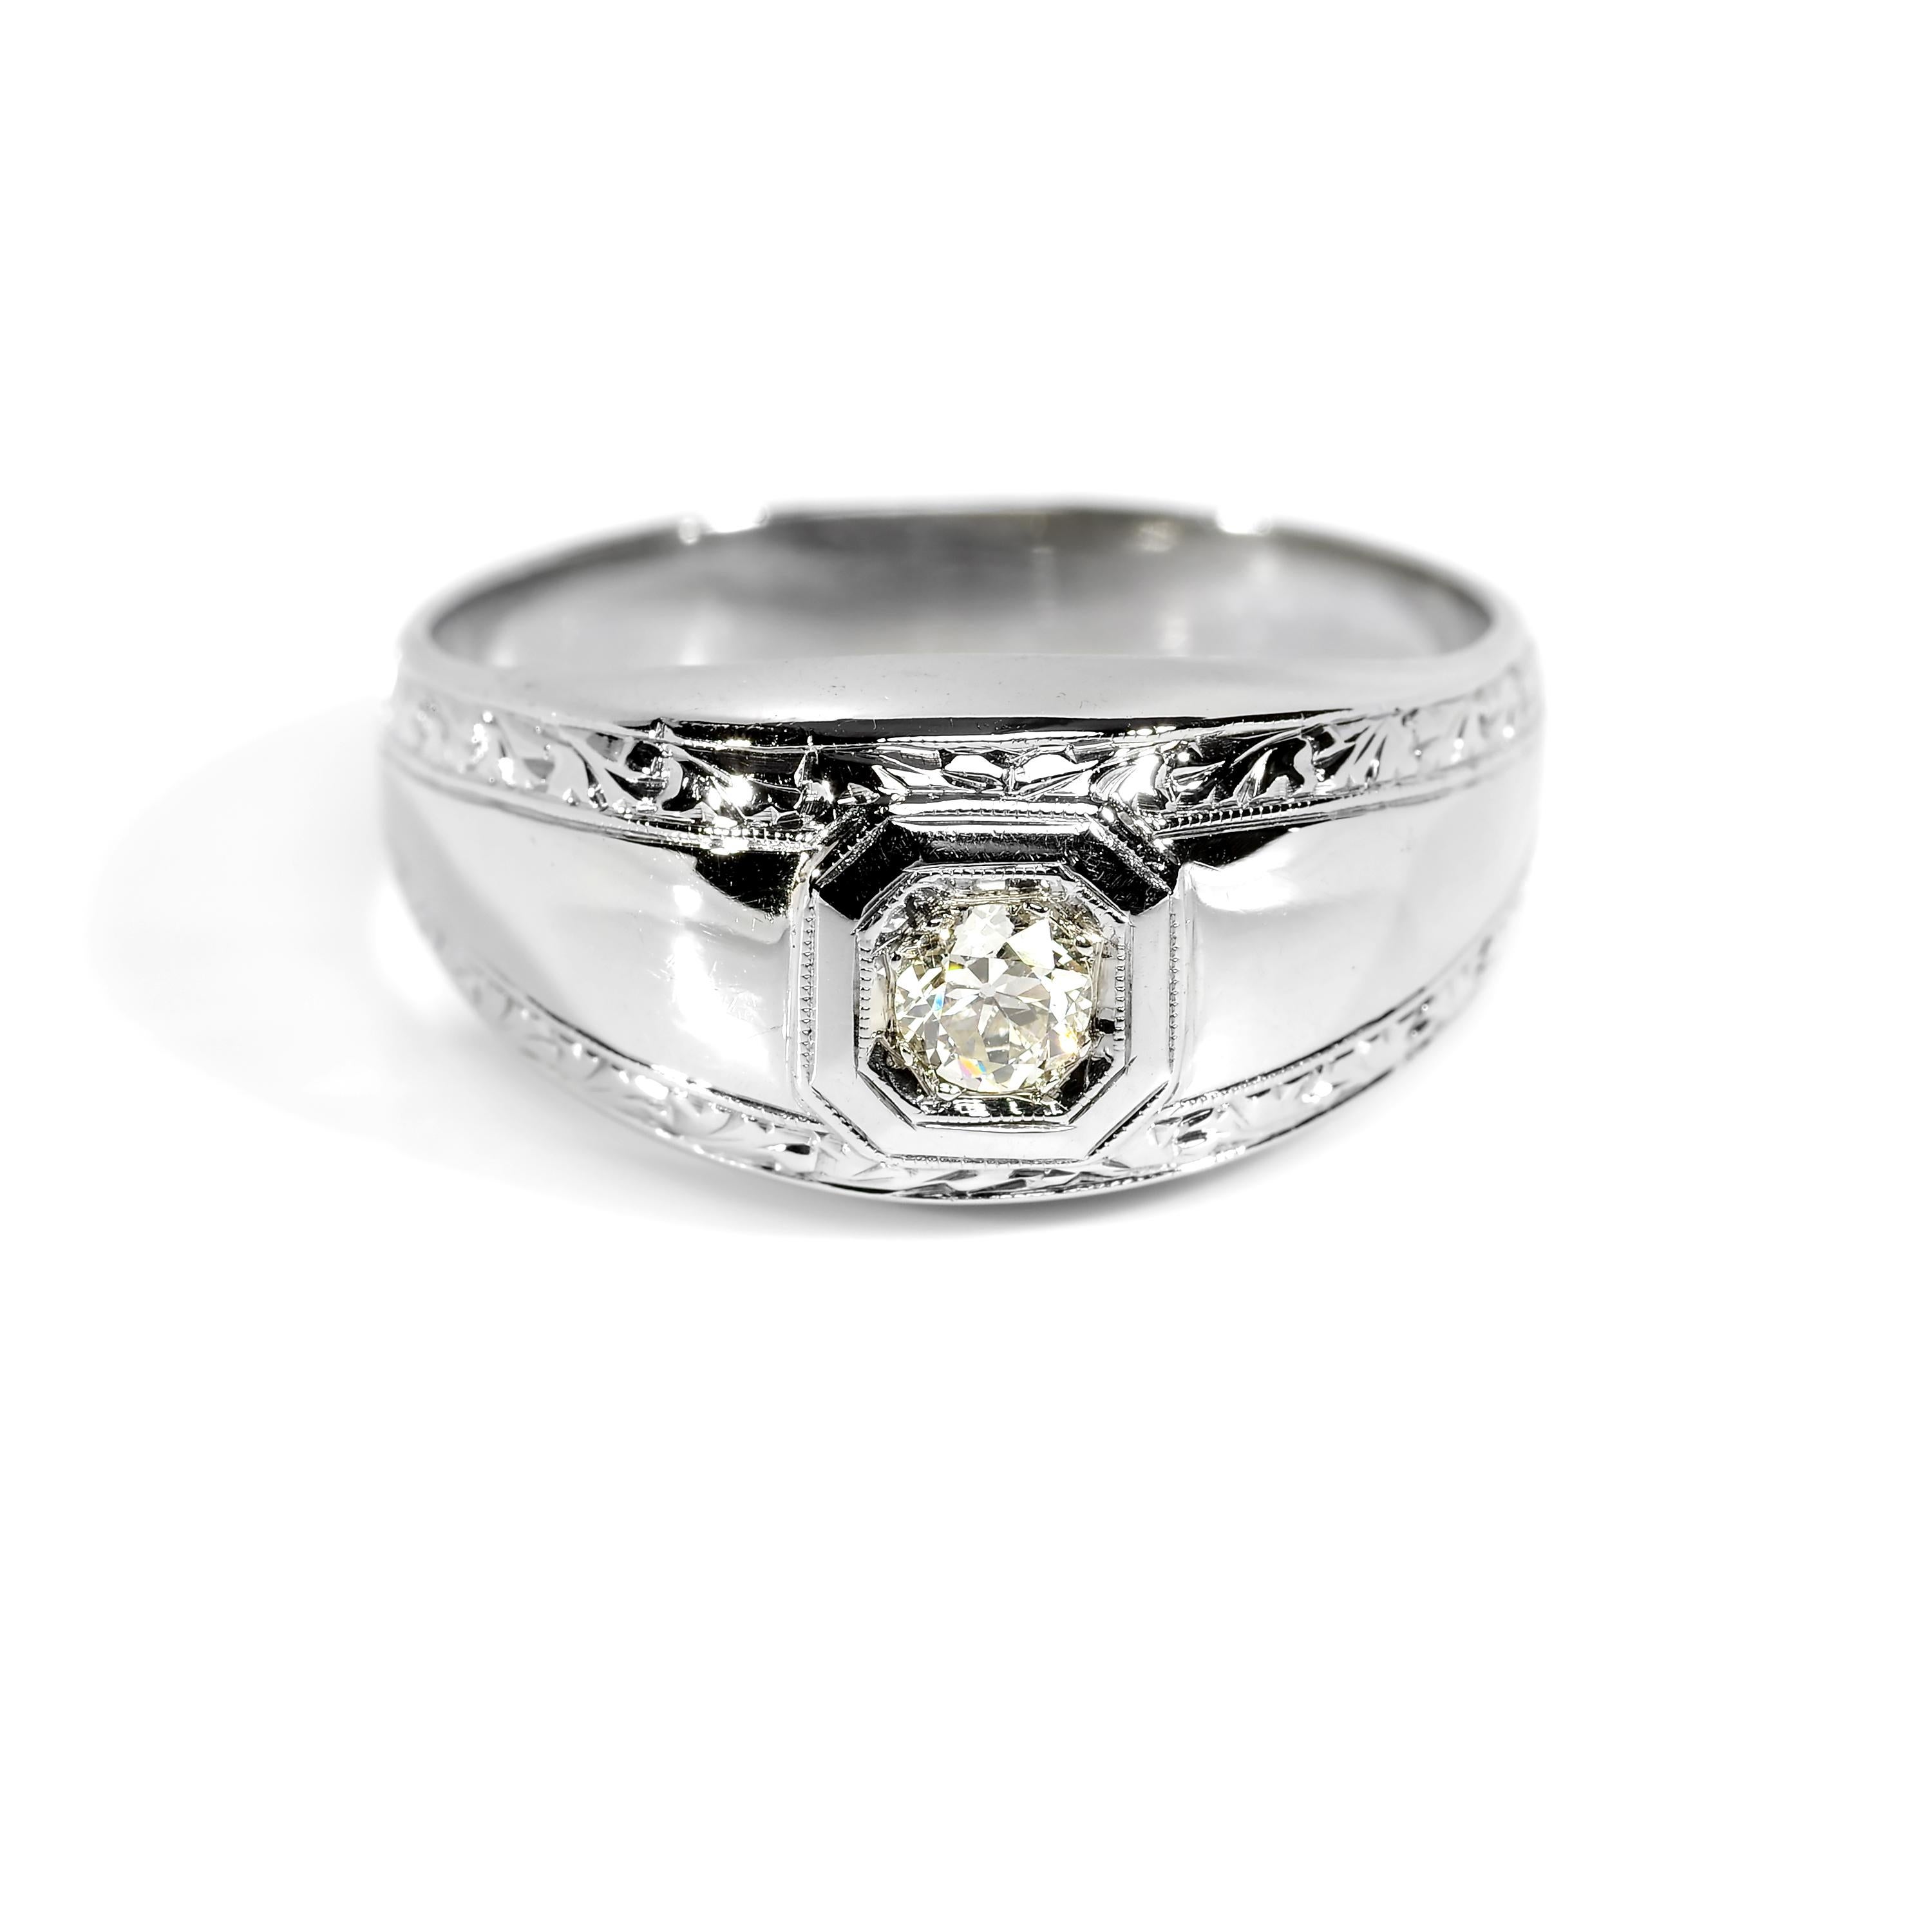 Sleek and aerodynamic, this 18K white gold and diamond men's ring from the Art Deco era is the very definition of understated elegance. 

A firey near-colorless (G/H) eye-clean (VS) old European-cut diamond weighing .20 carats is prong-set within a